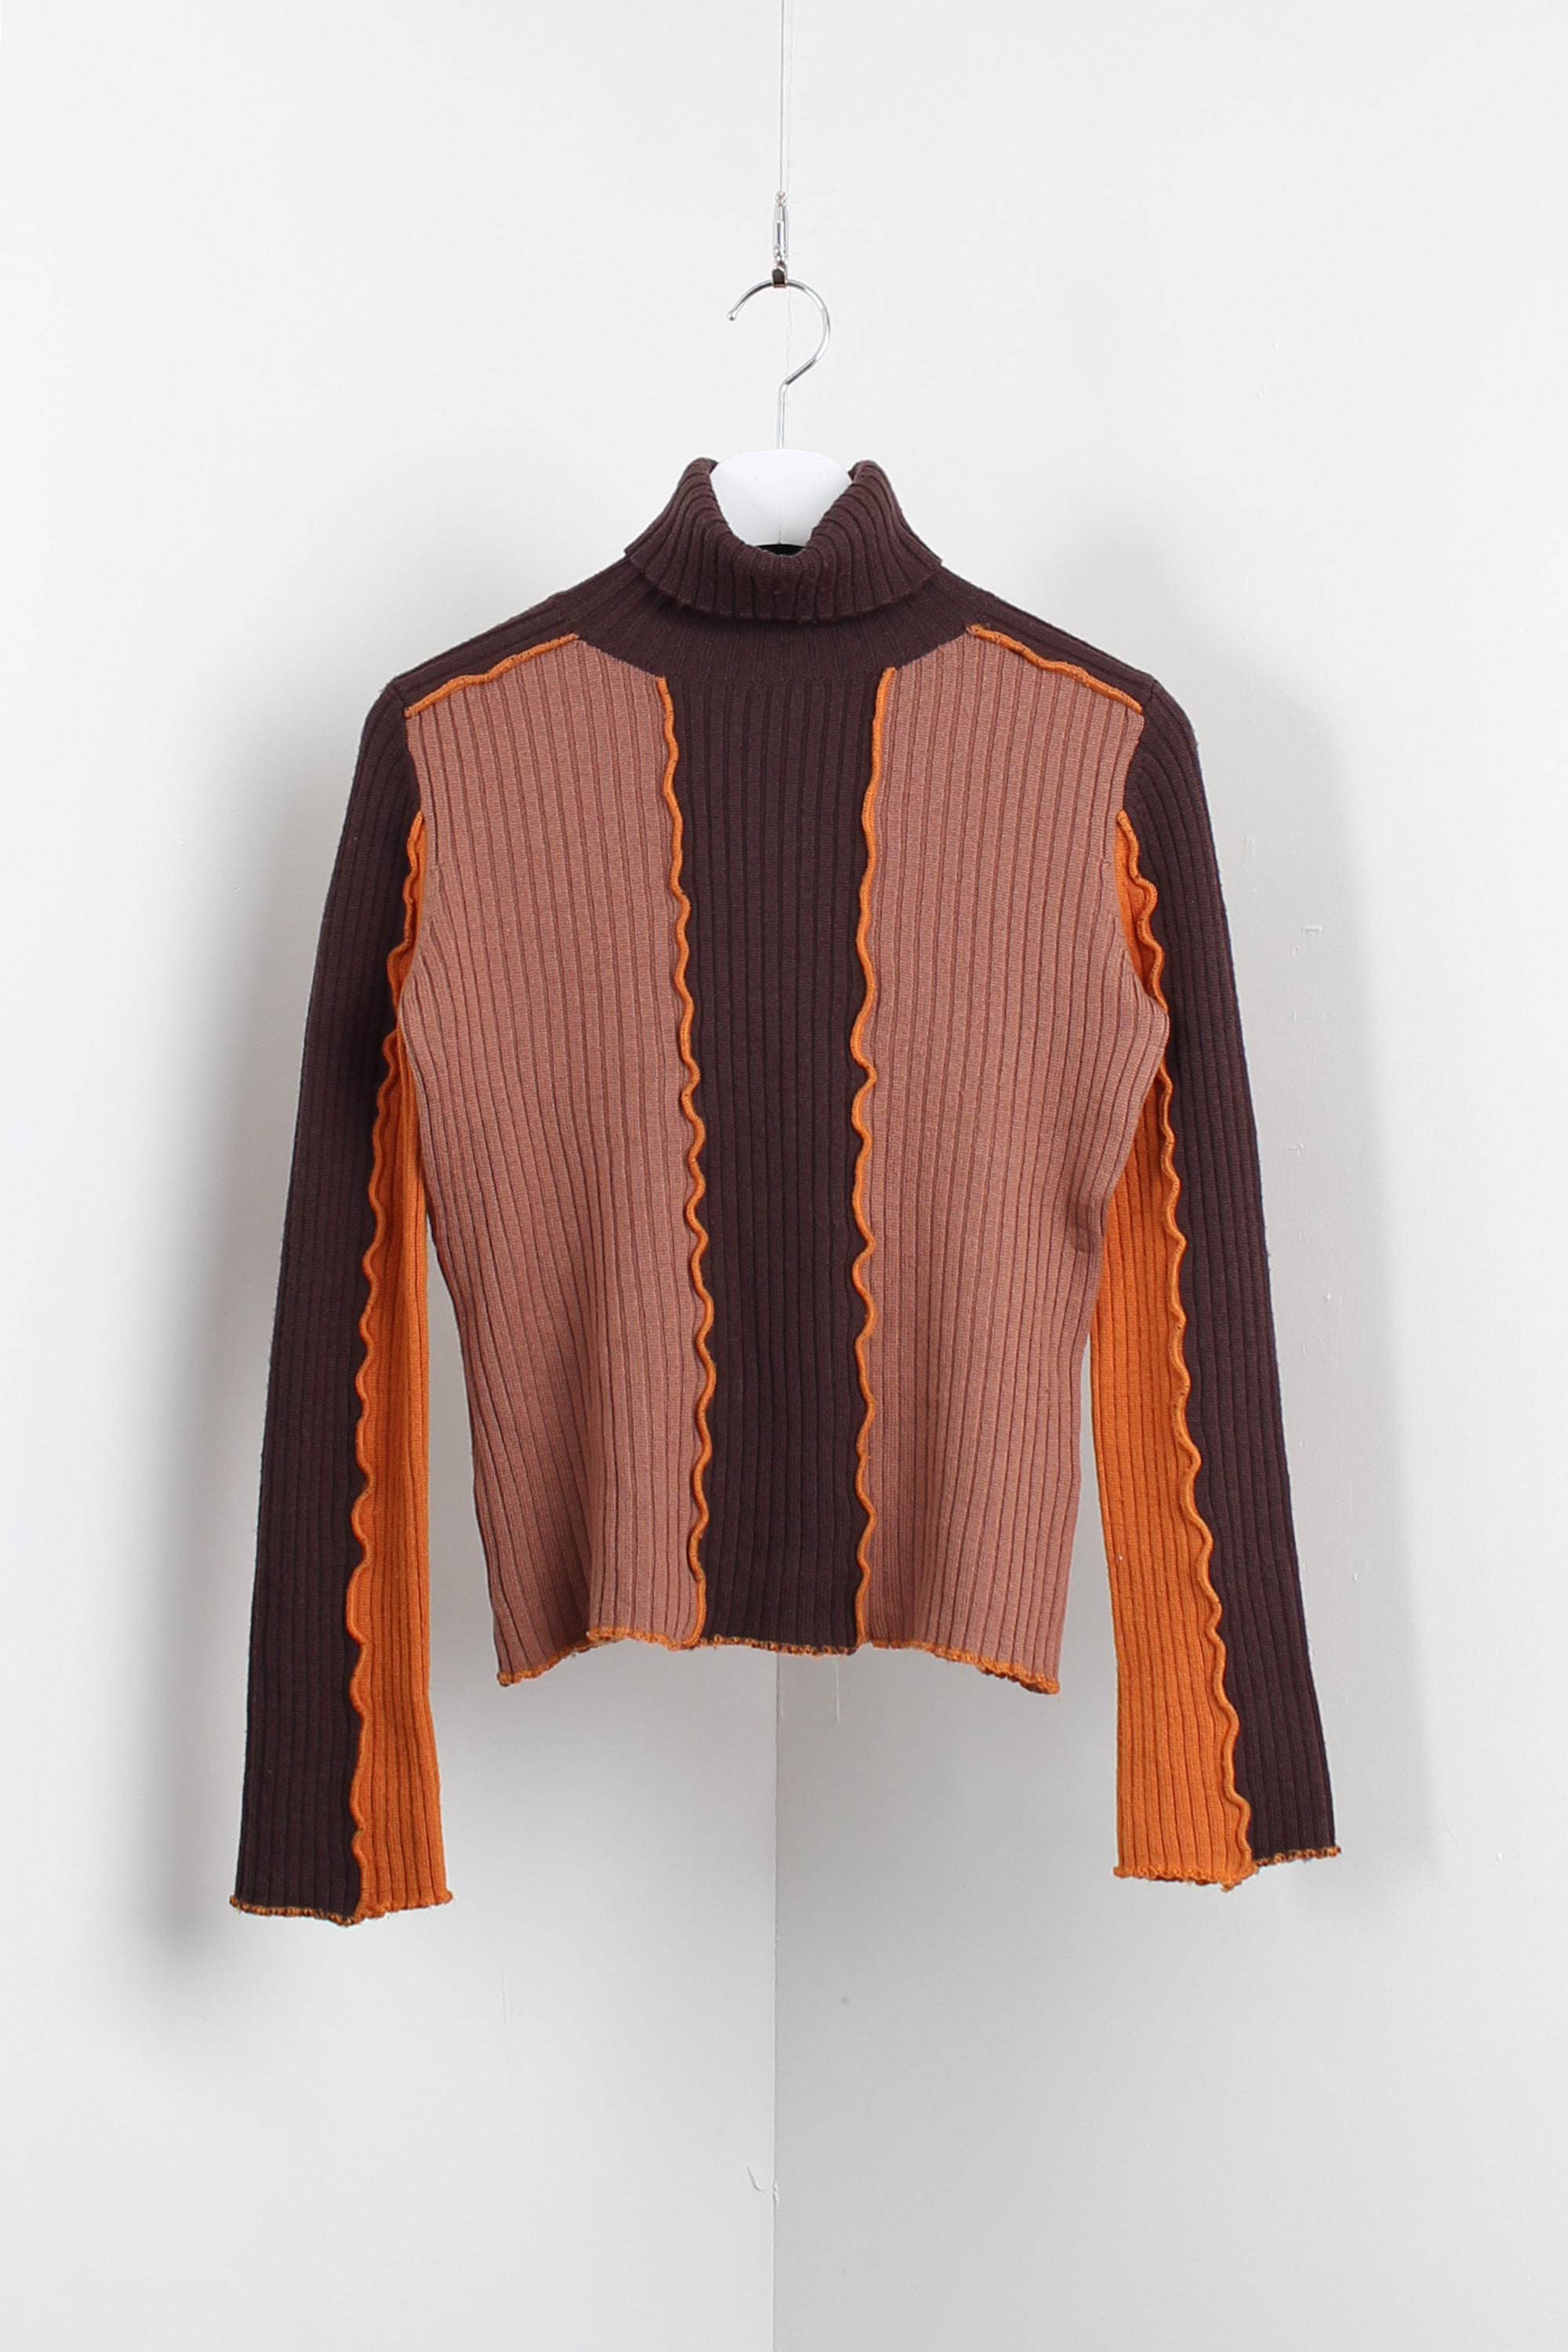 SUTFESO highneck knit